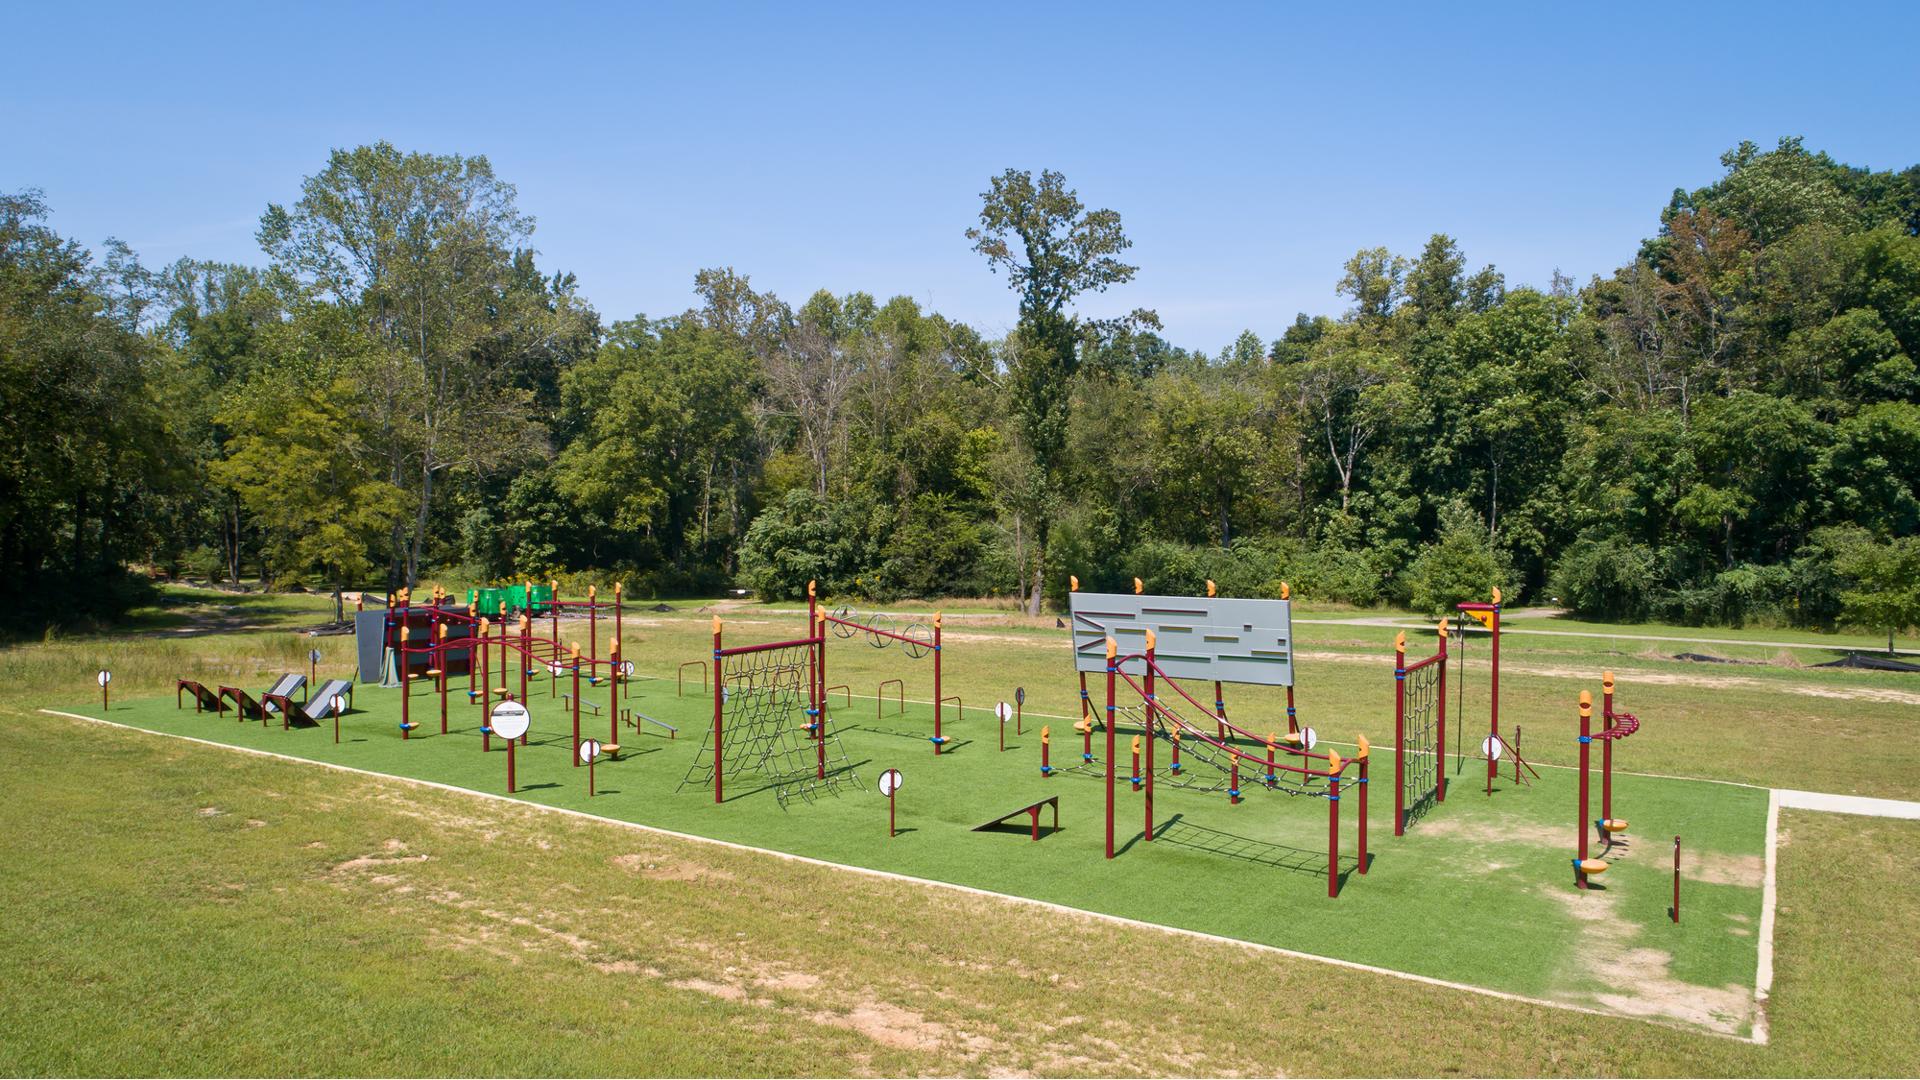 FitCore™ Extreme fitness course at Riverview Park.  Includes all 15 FitCore Extreme obstacles to give users a full body workout.